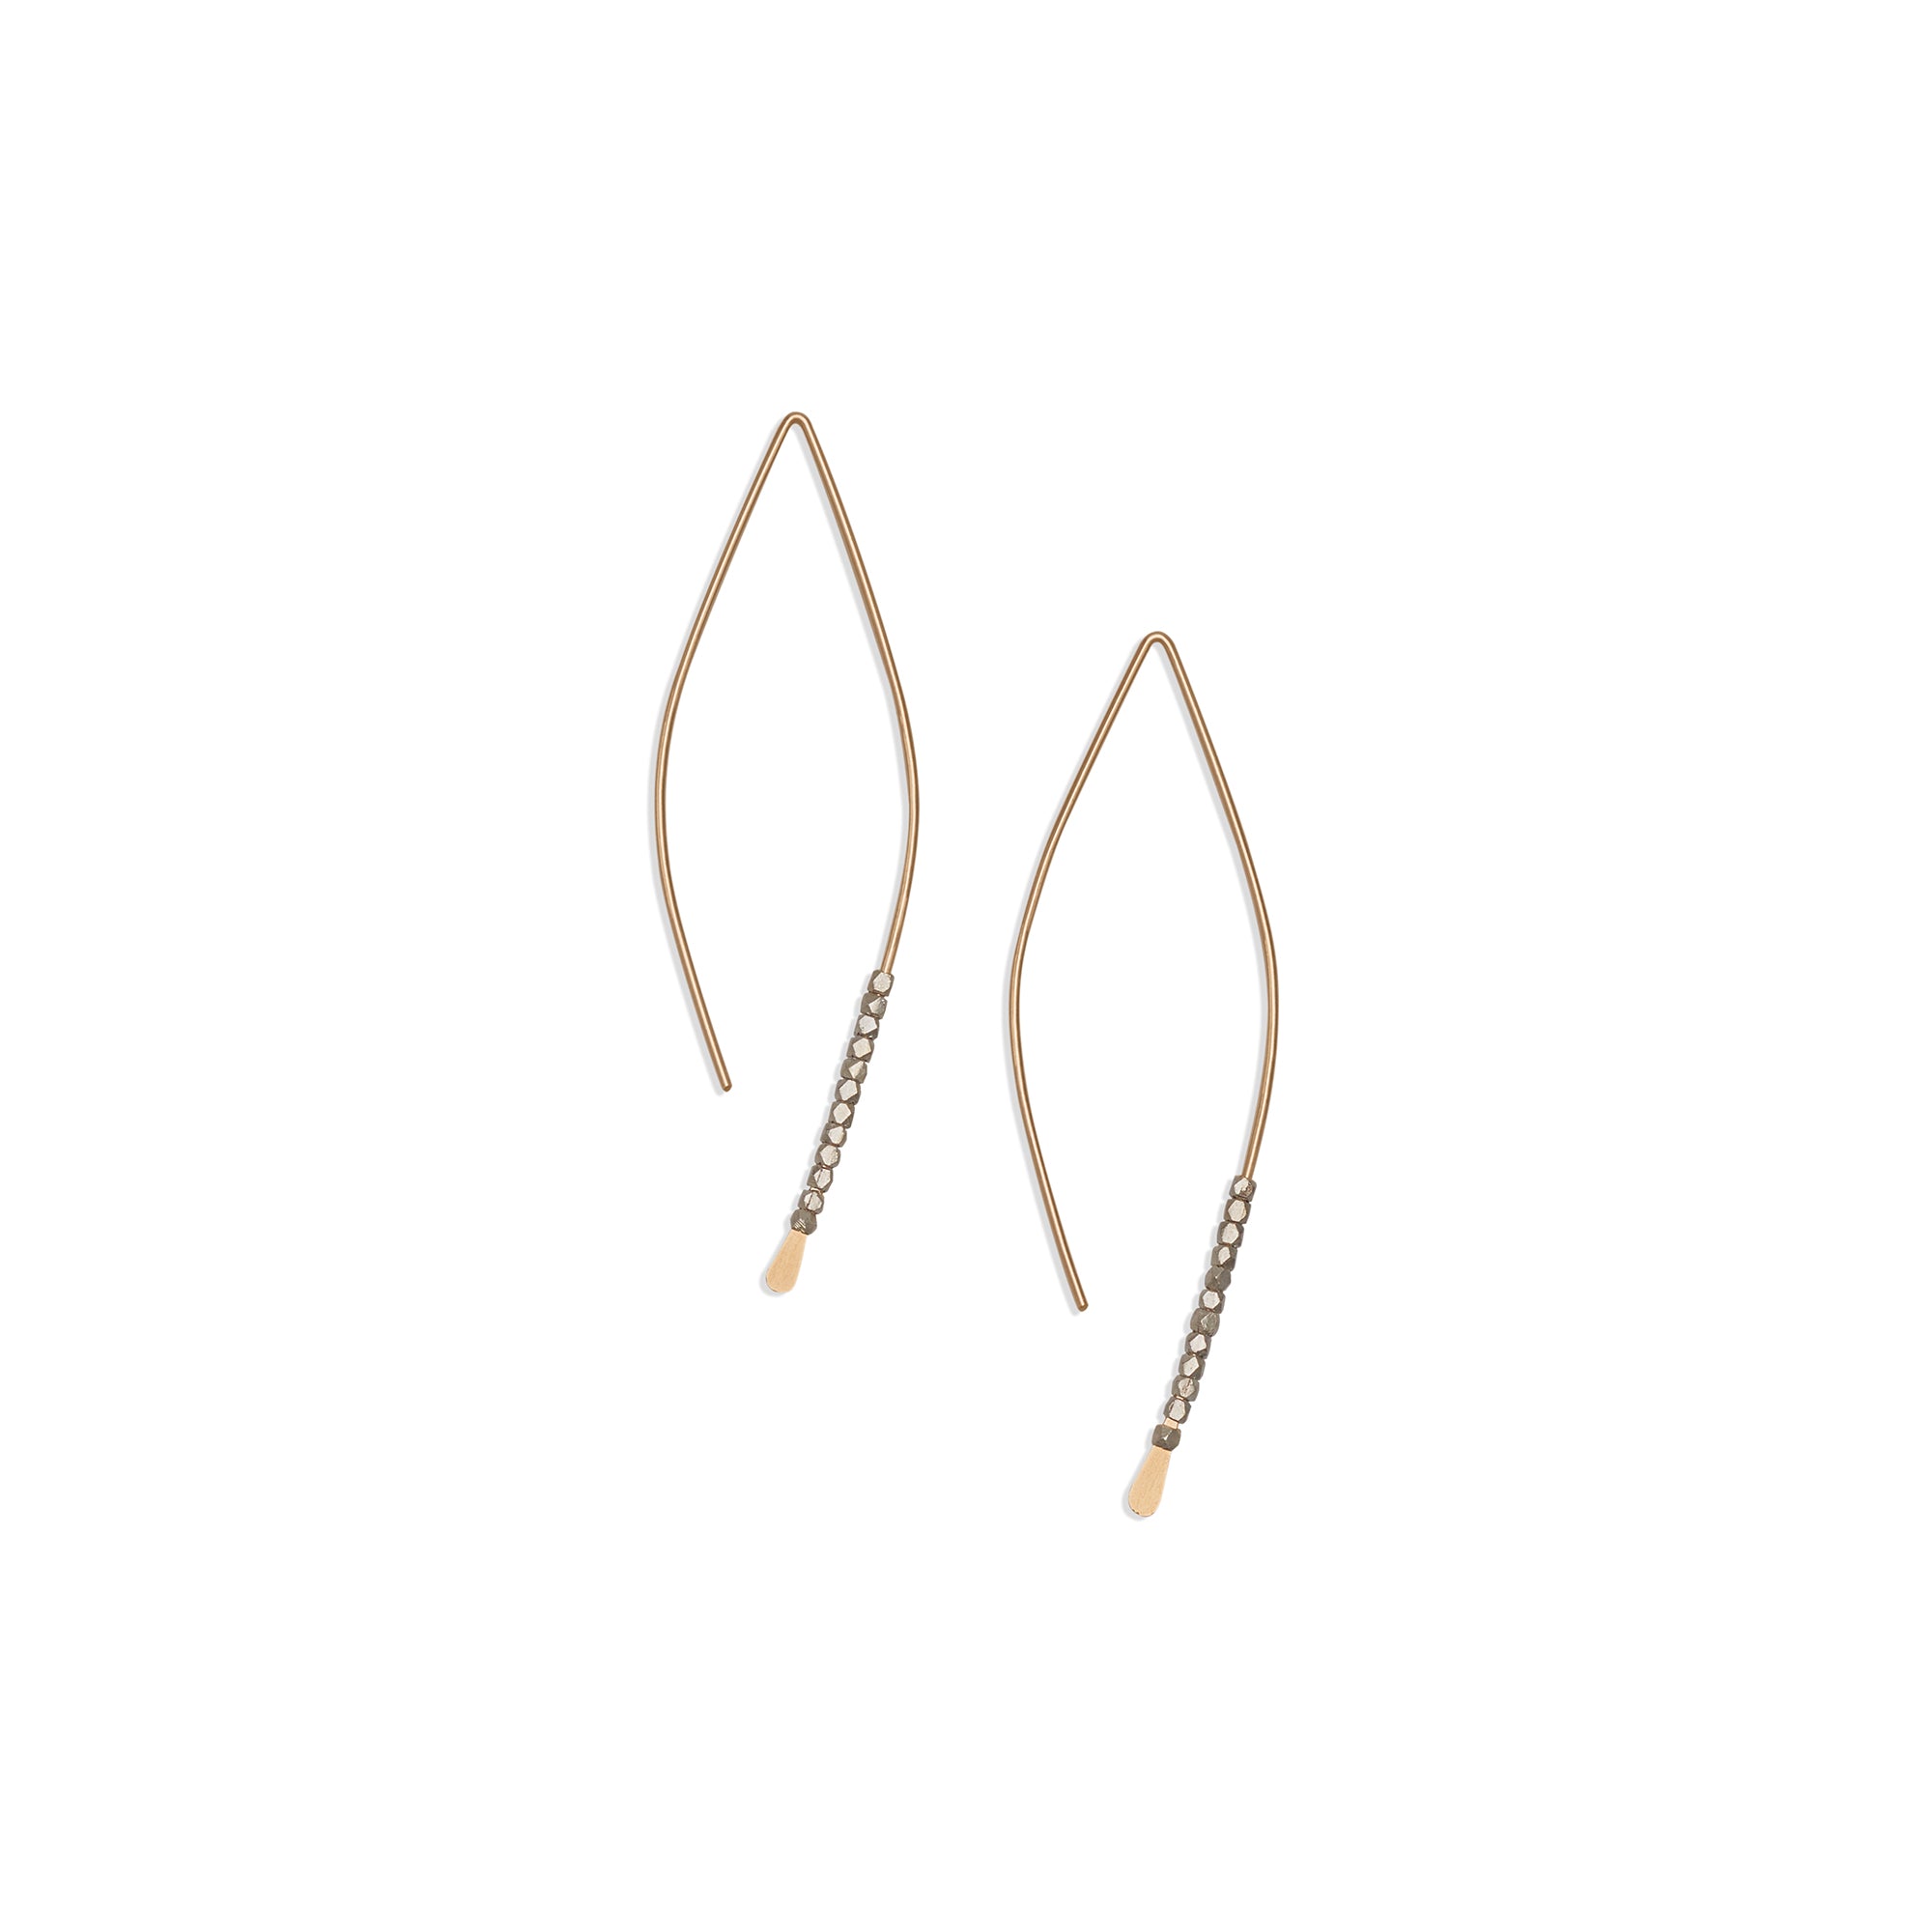 The thin, hammered wire of the Bead Crescent earrings creates a smooth marquise shape, adorned with sterling silver beads